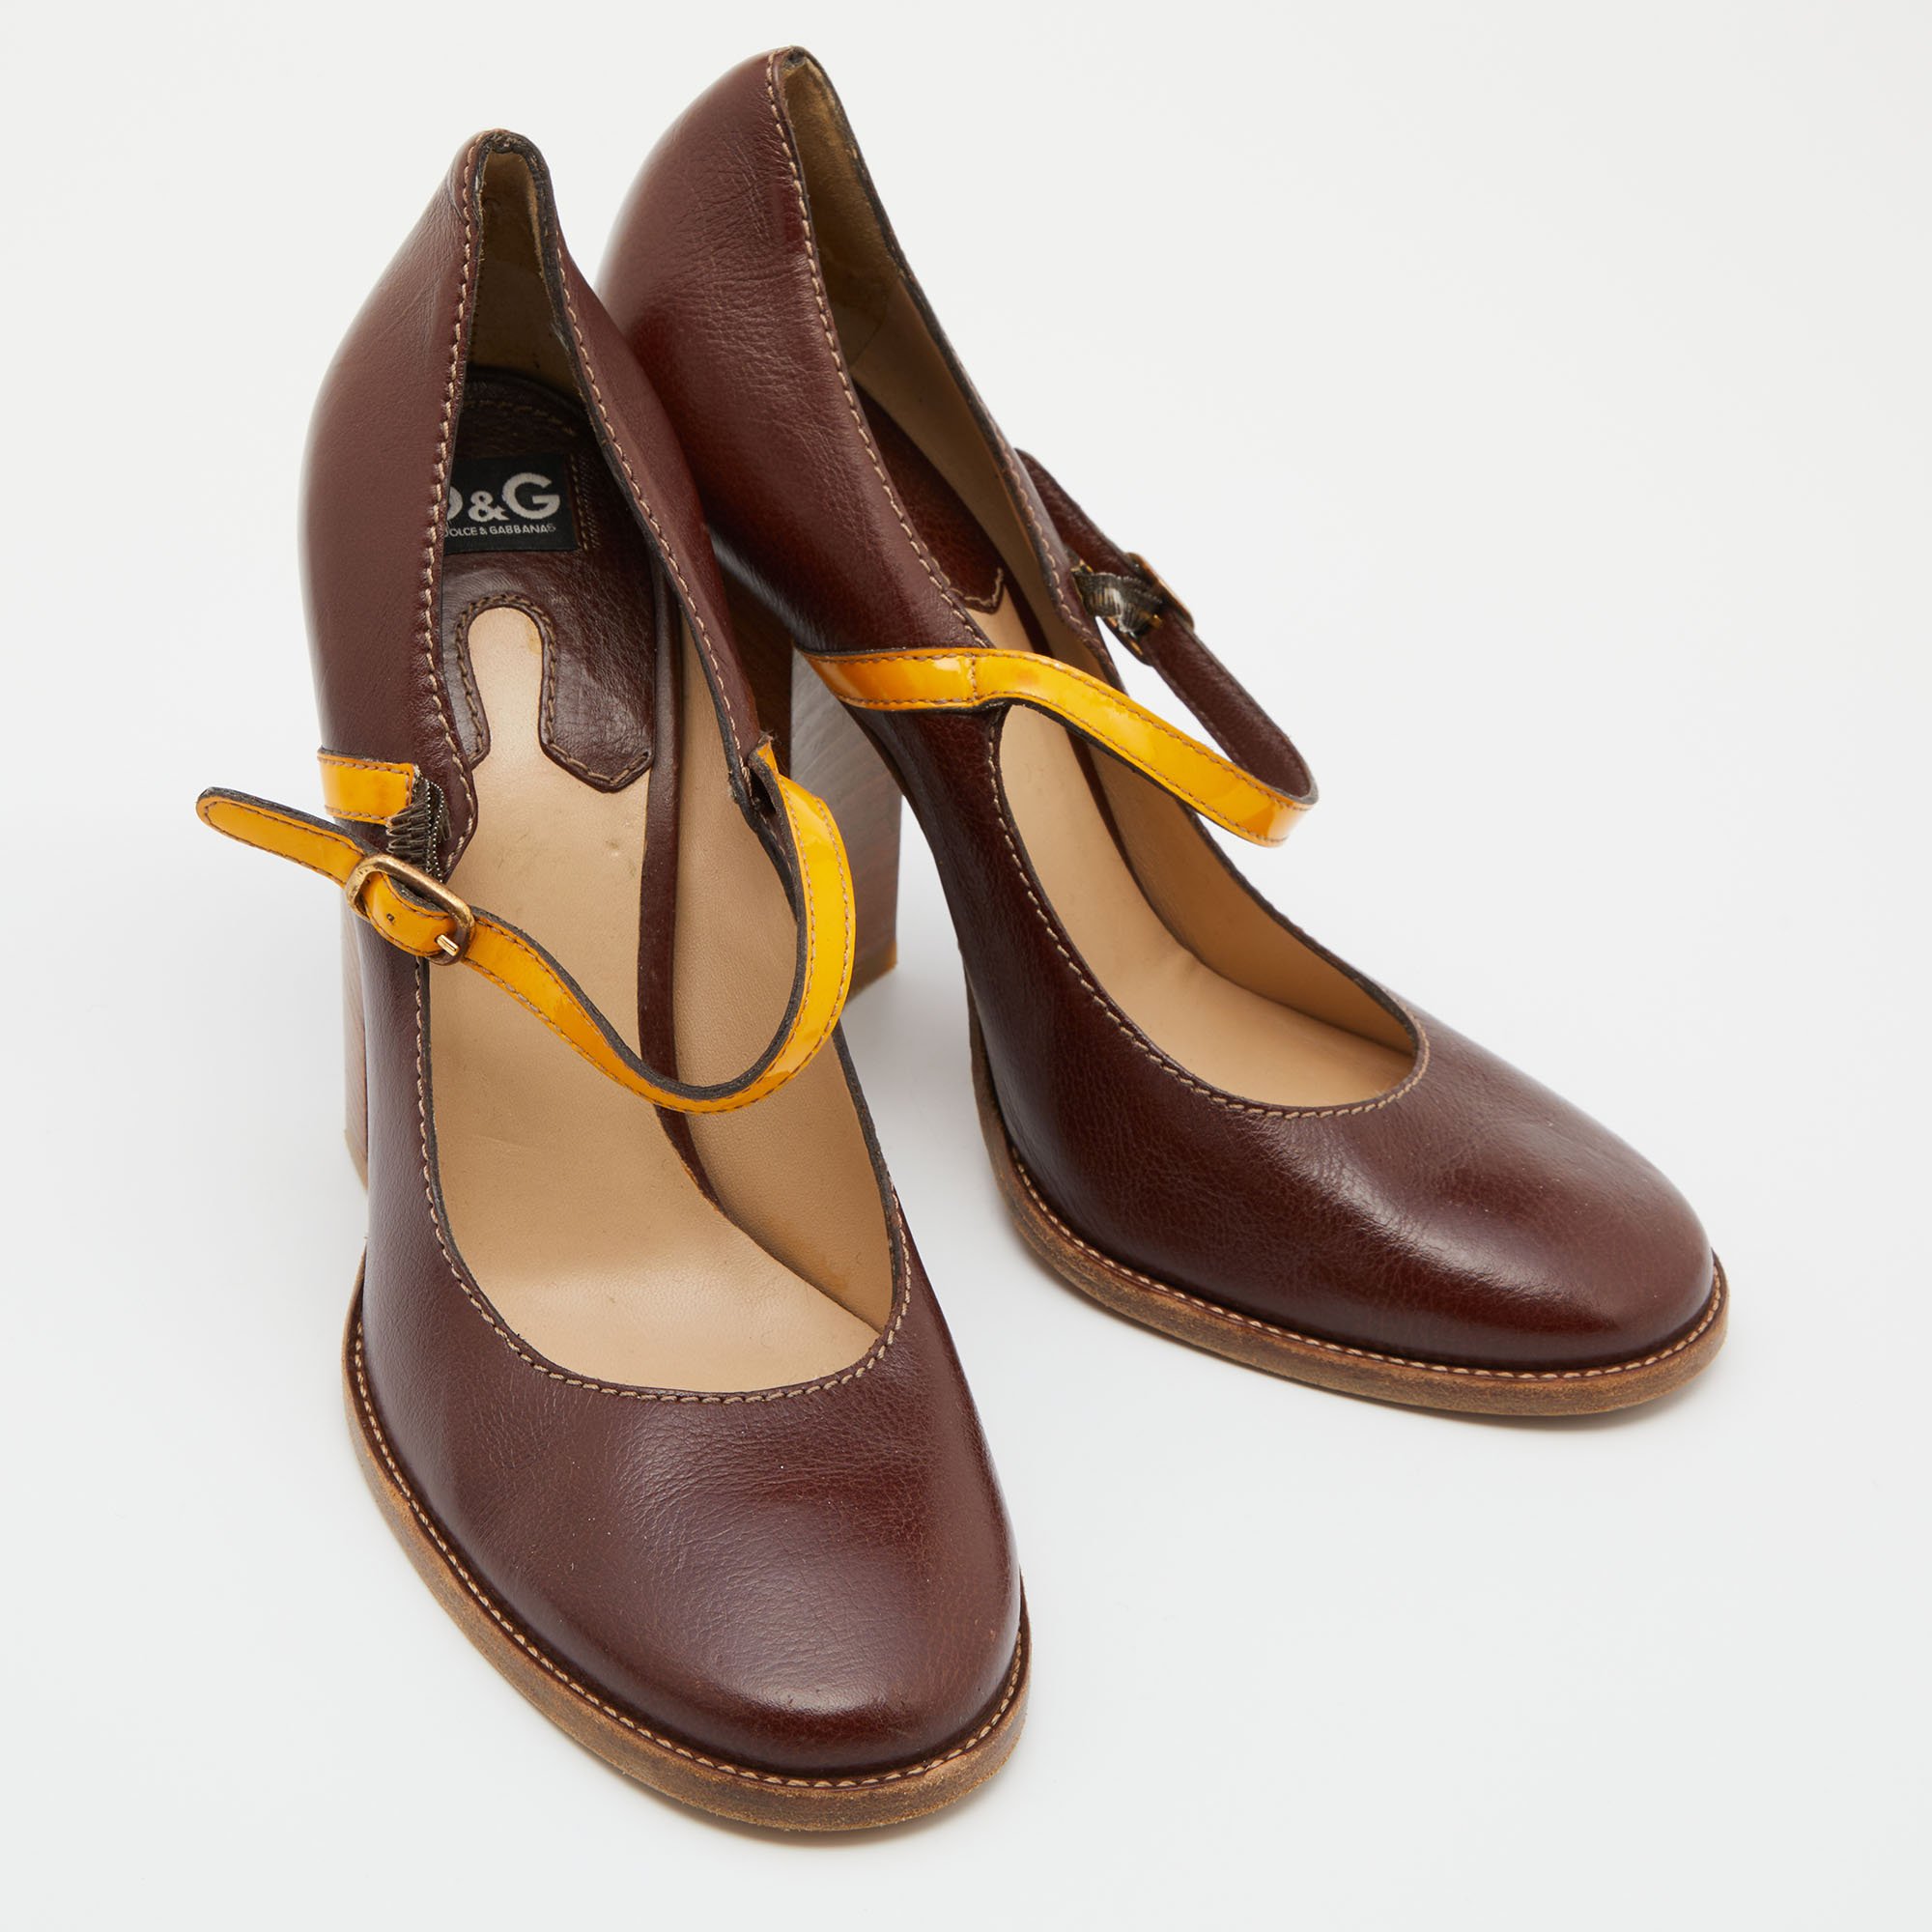 D&G Brown/Yellow Patent And Leather Block Heel Pumps Size 40